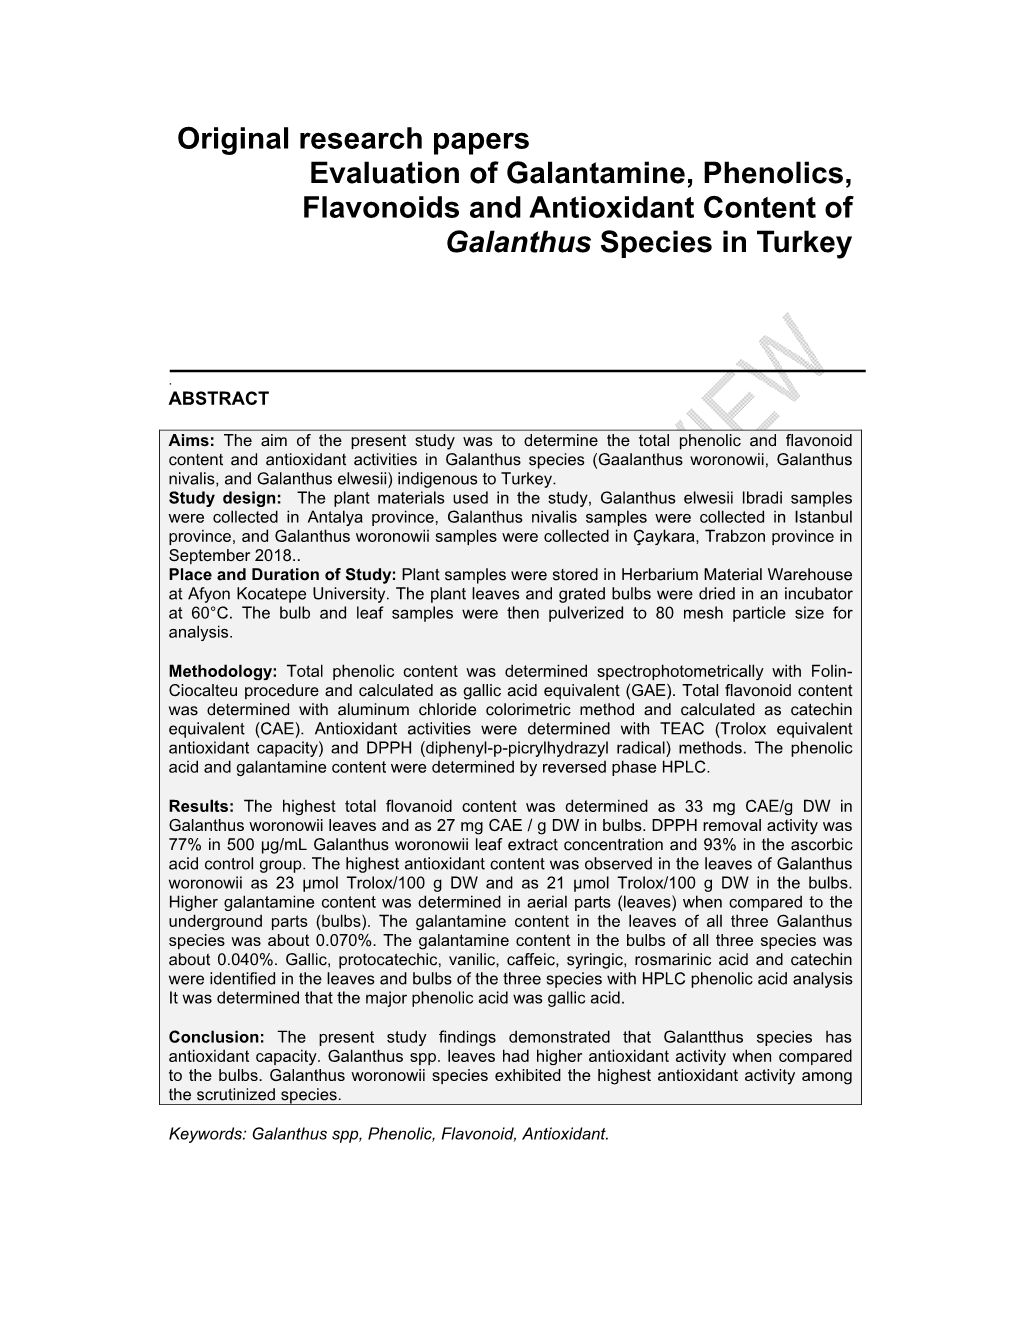 Original Research Papers Evaluation of Galantamine, Phenolics, Flavonoids and Antioxidant Content of Galanthus Species in Turkey